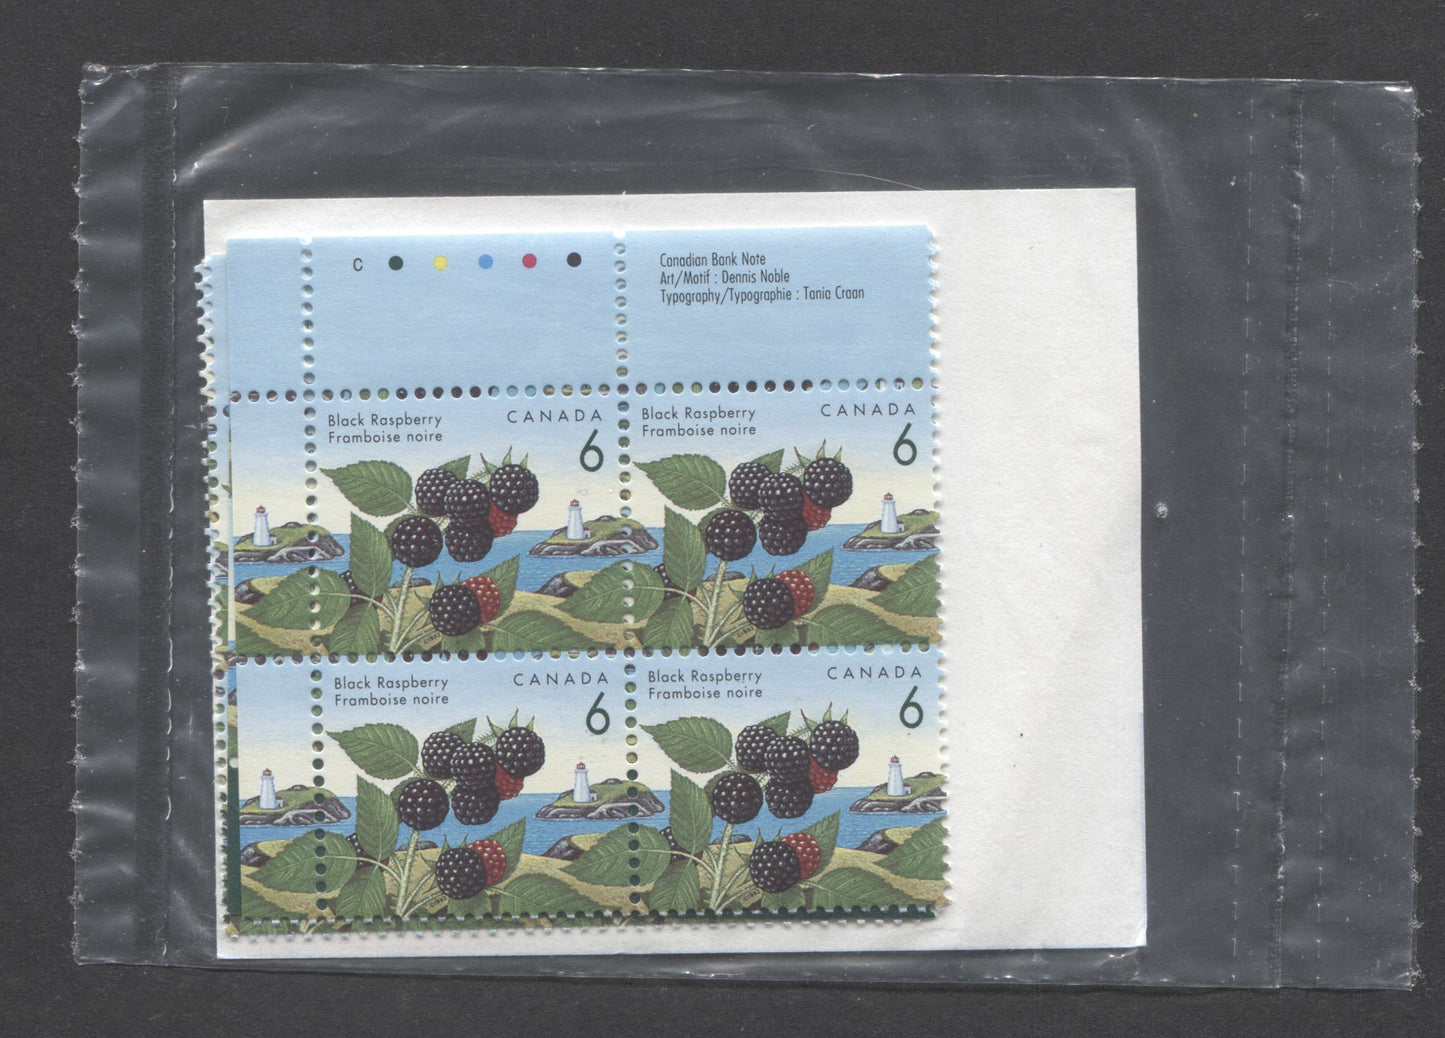 Lot 19 Canada #1353ii 6c Multicoloured 1992 - 1998 Edible Berries Definitive Issue, Canada Post Sealed Pack of Inscription Blocks, CBN Printing On DF CPP Paper, With HB Type 6B Insert Card, VFNH, Unitrade Cat. $5